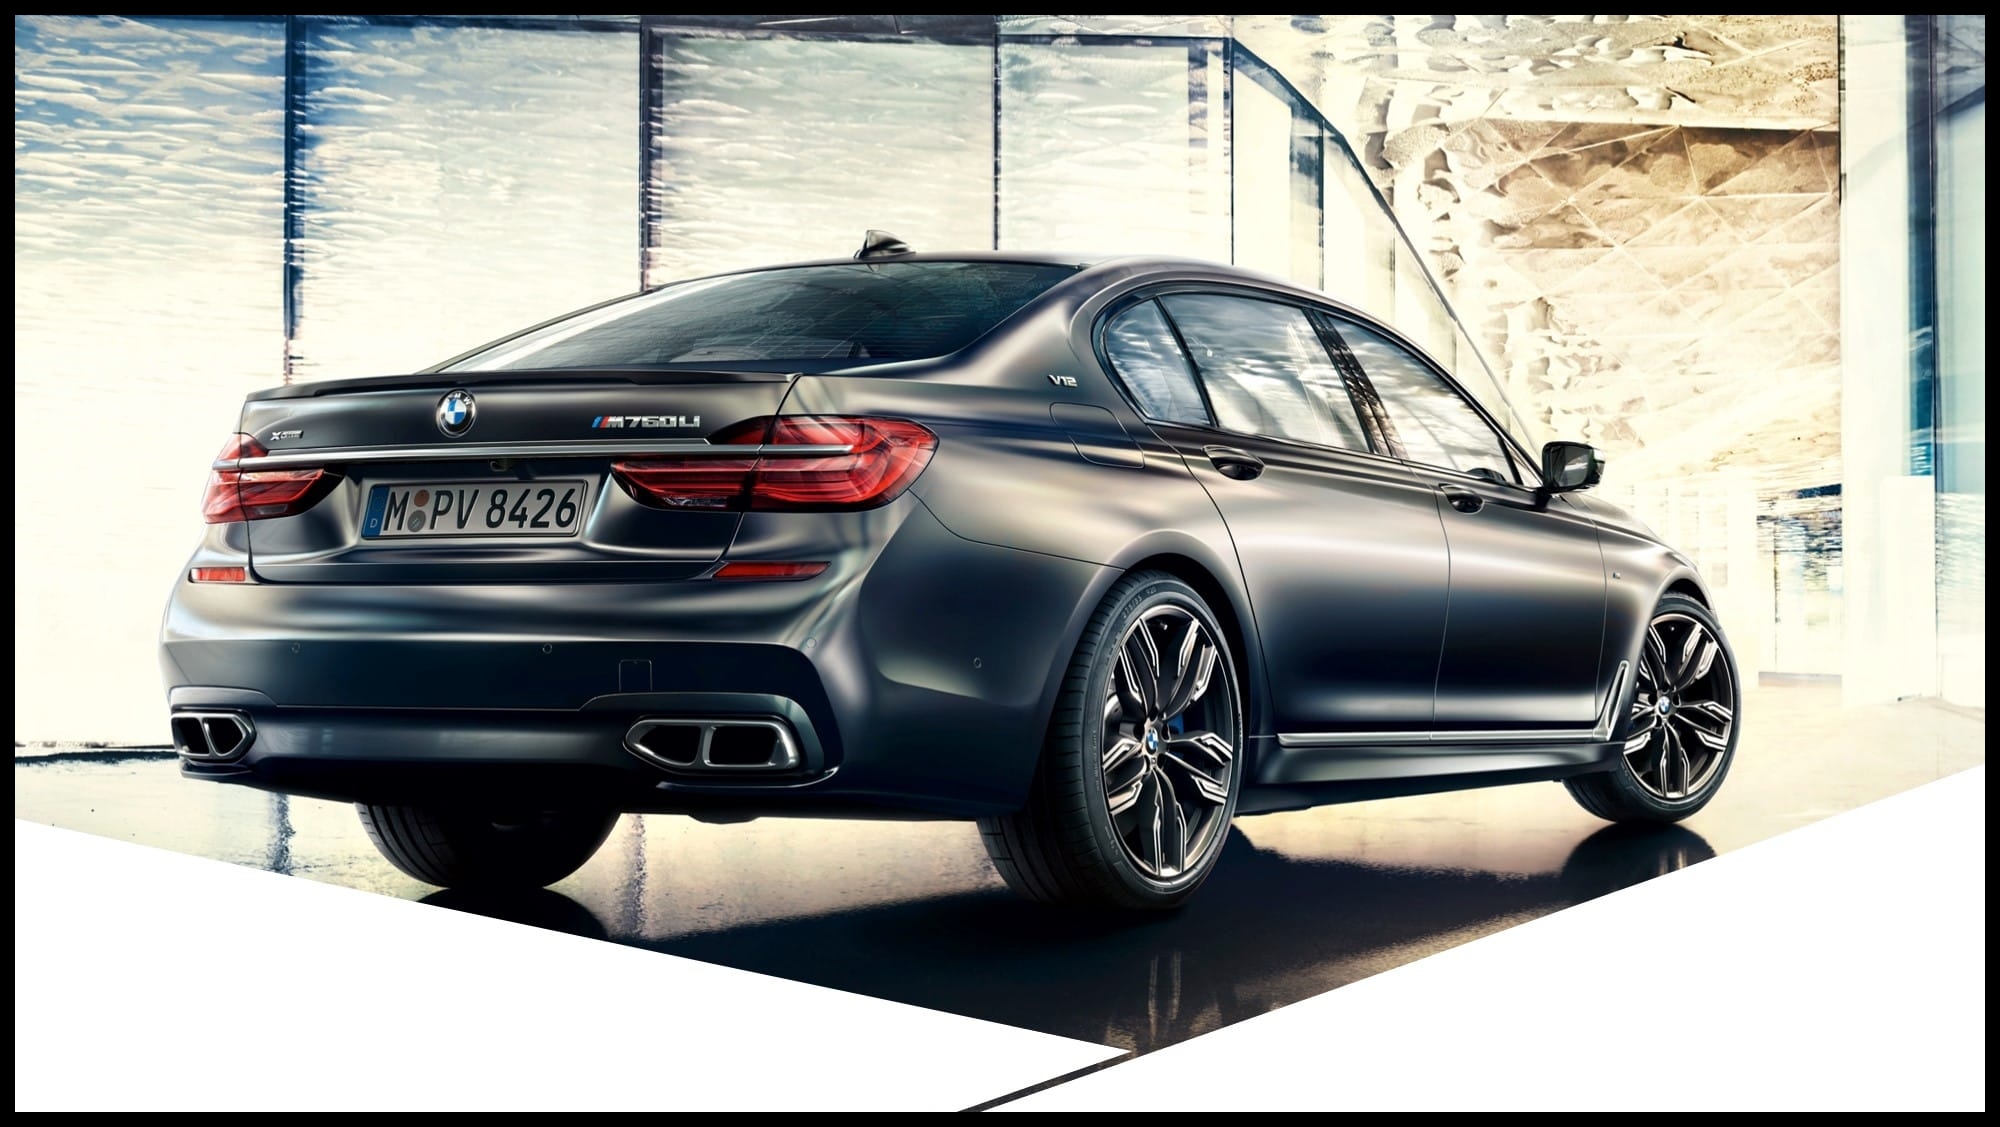 This four door sedan takes everything that you love about a BMW 7 Series and makes it that much better with an exclusive M aerodynamic package